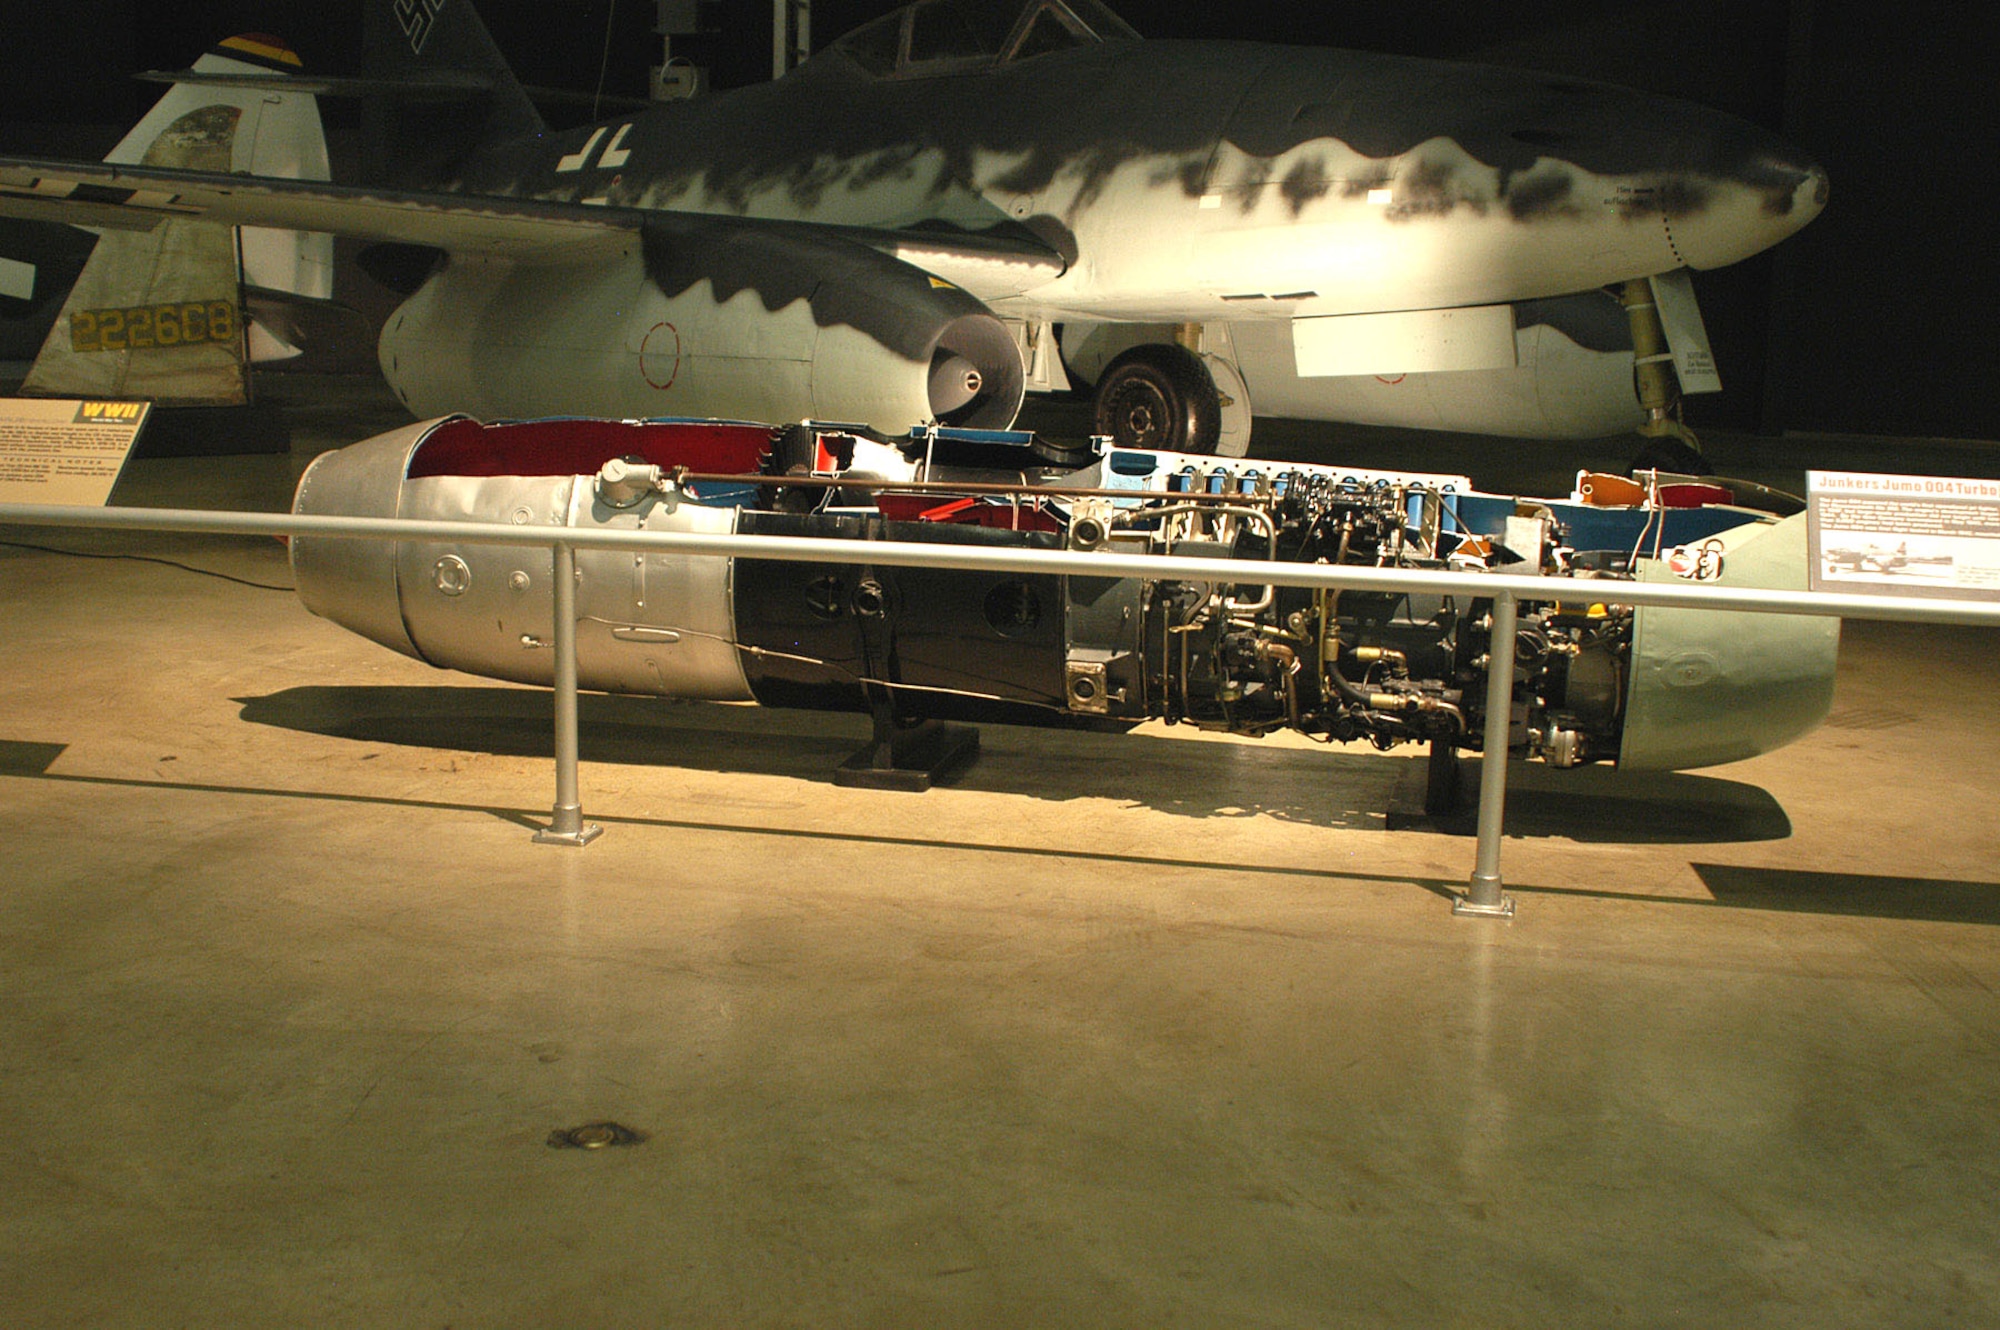 DAYTON, Ohio -- Junkers Jumo 004 turbojet engine on display in the World War II Gallery at the National Museum of the United States Air Force. (U.S. Air Force photo)